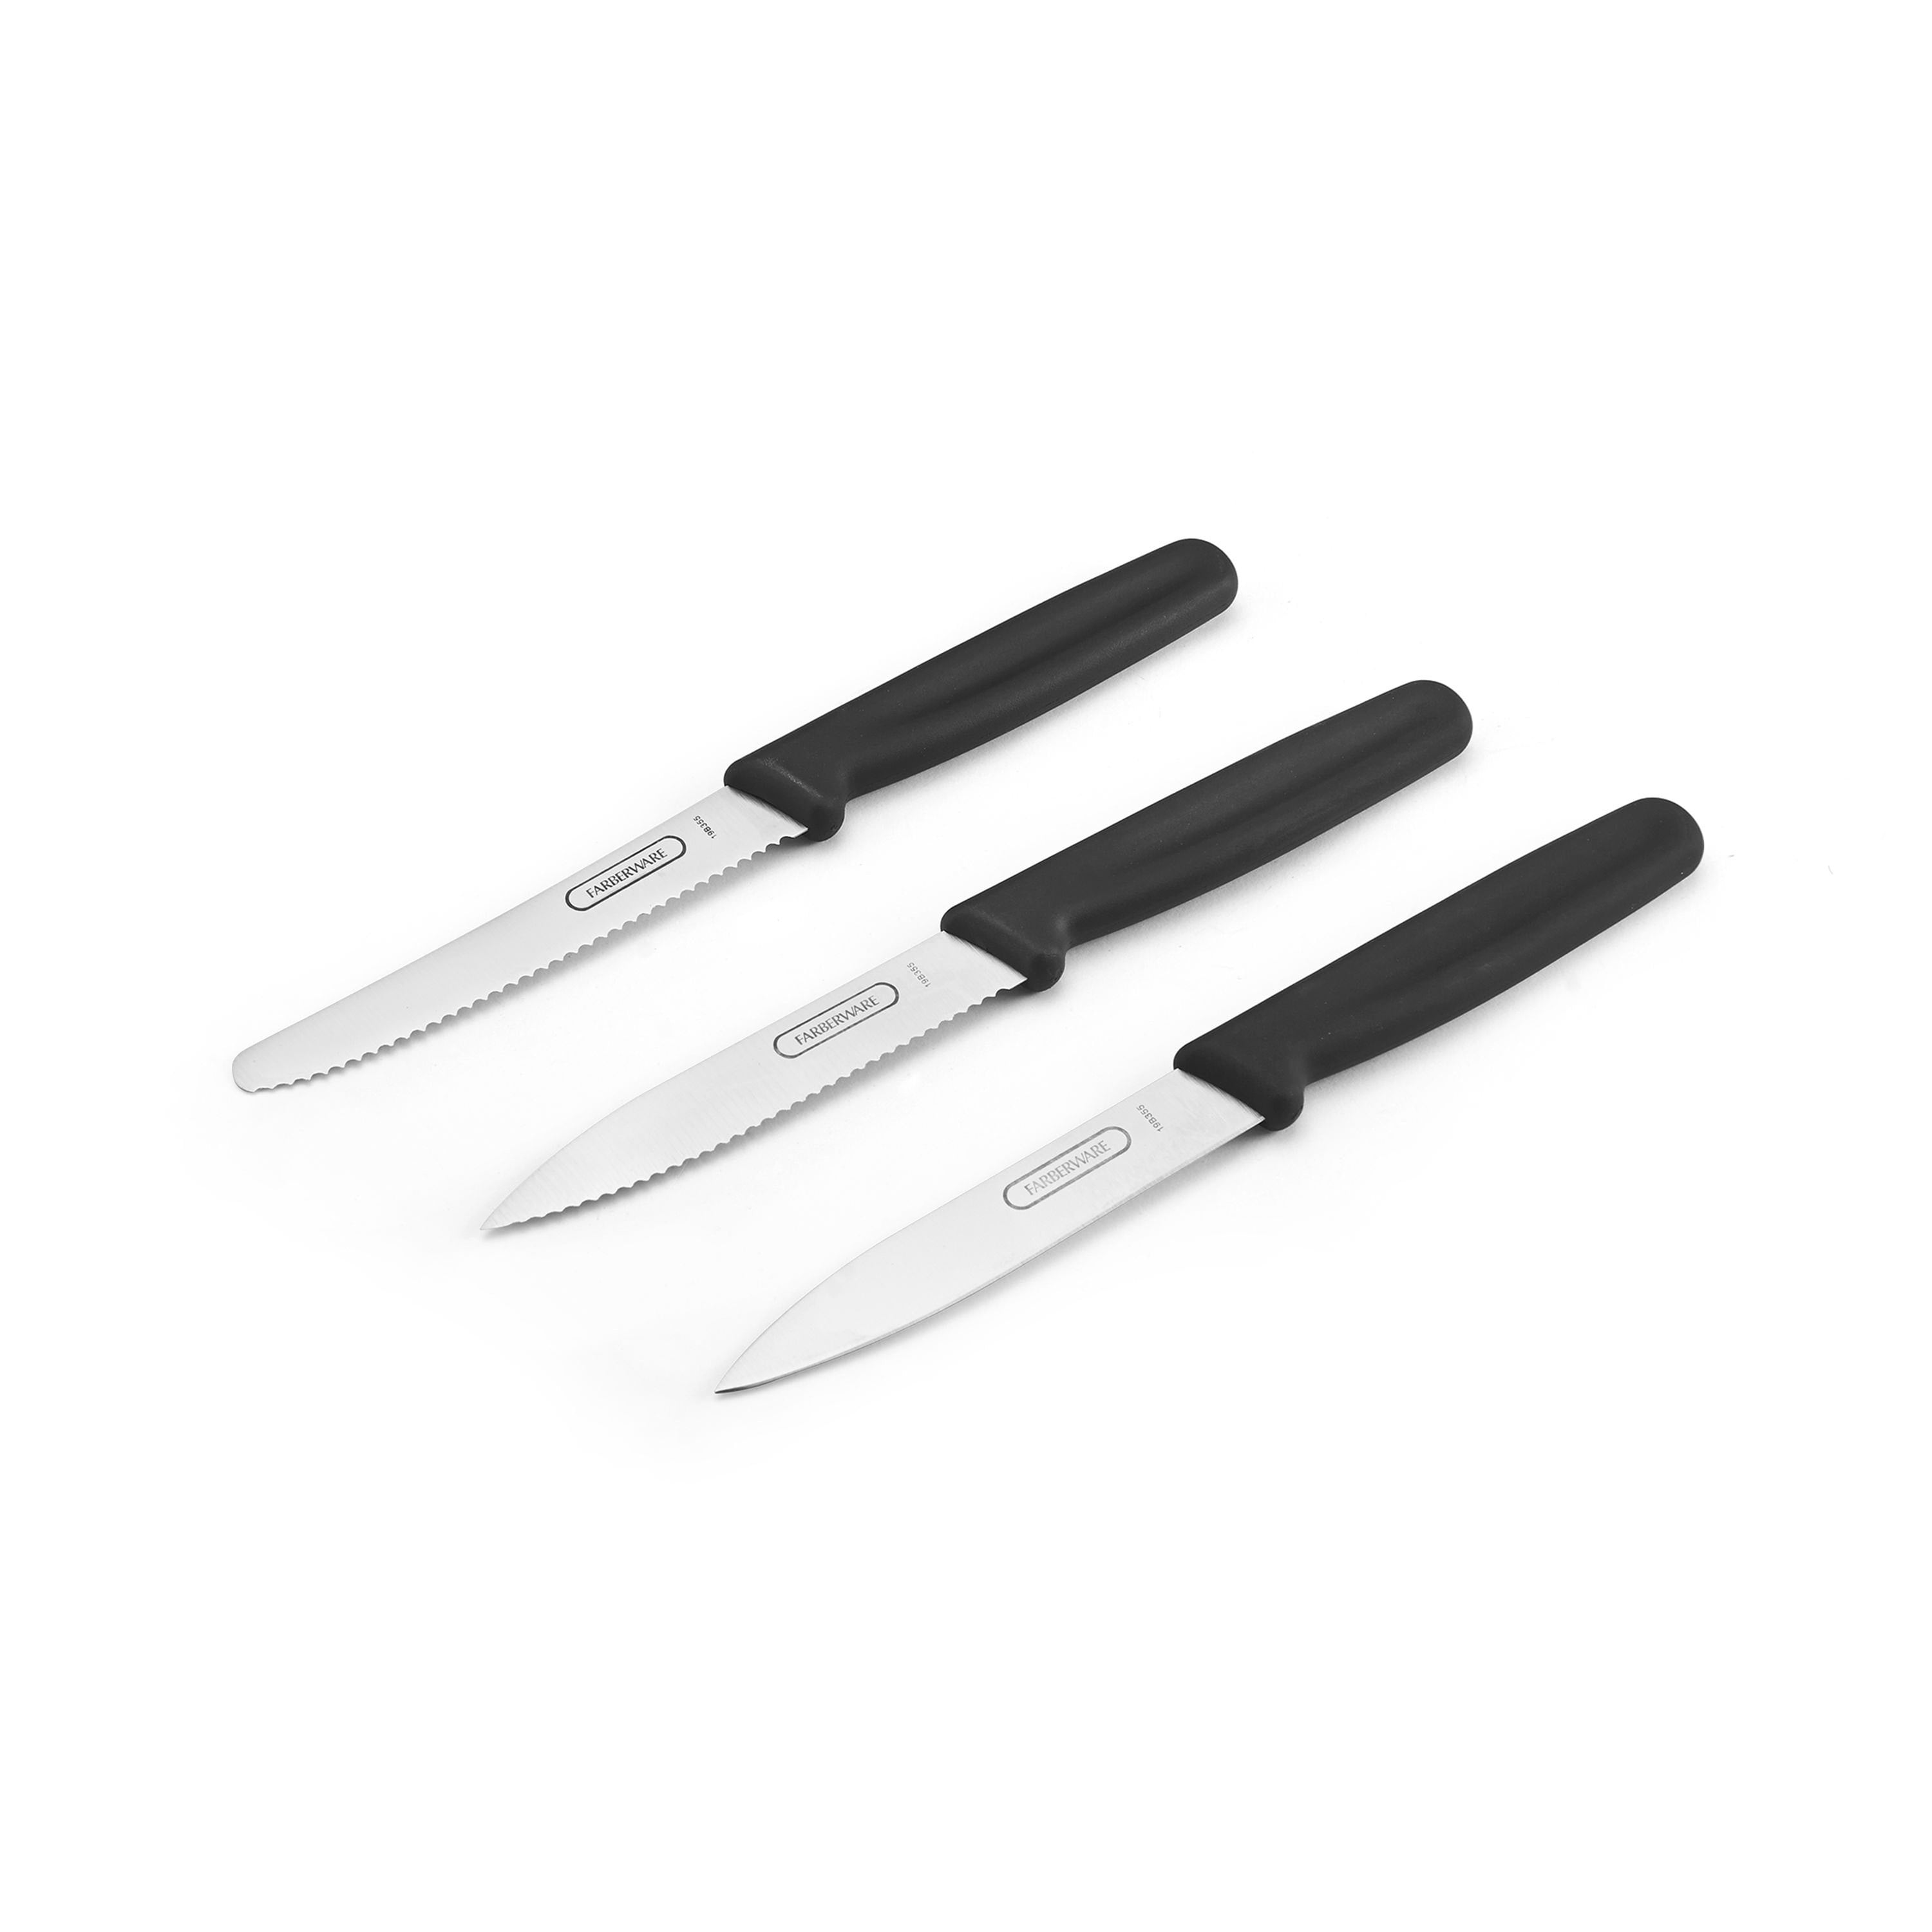 Farberware Pro Stainless Steel Paring Knife / Knives Set of 2